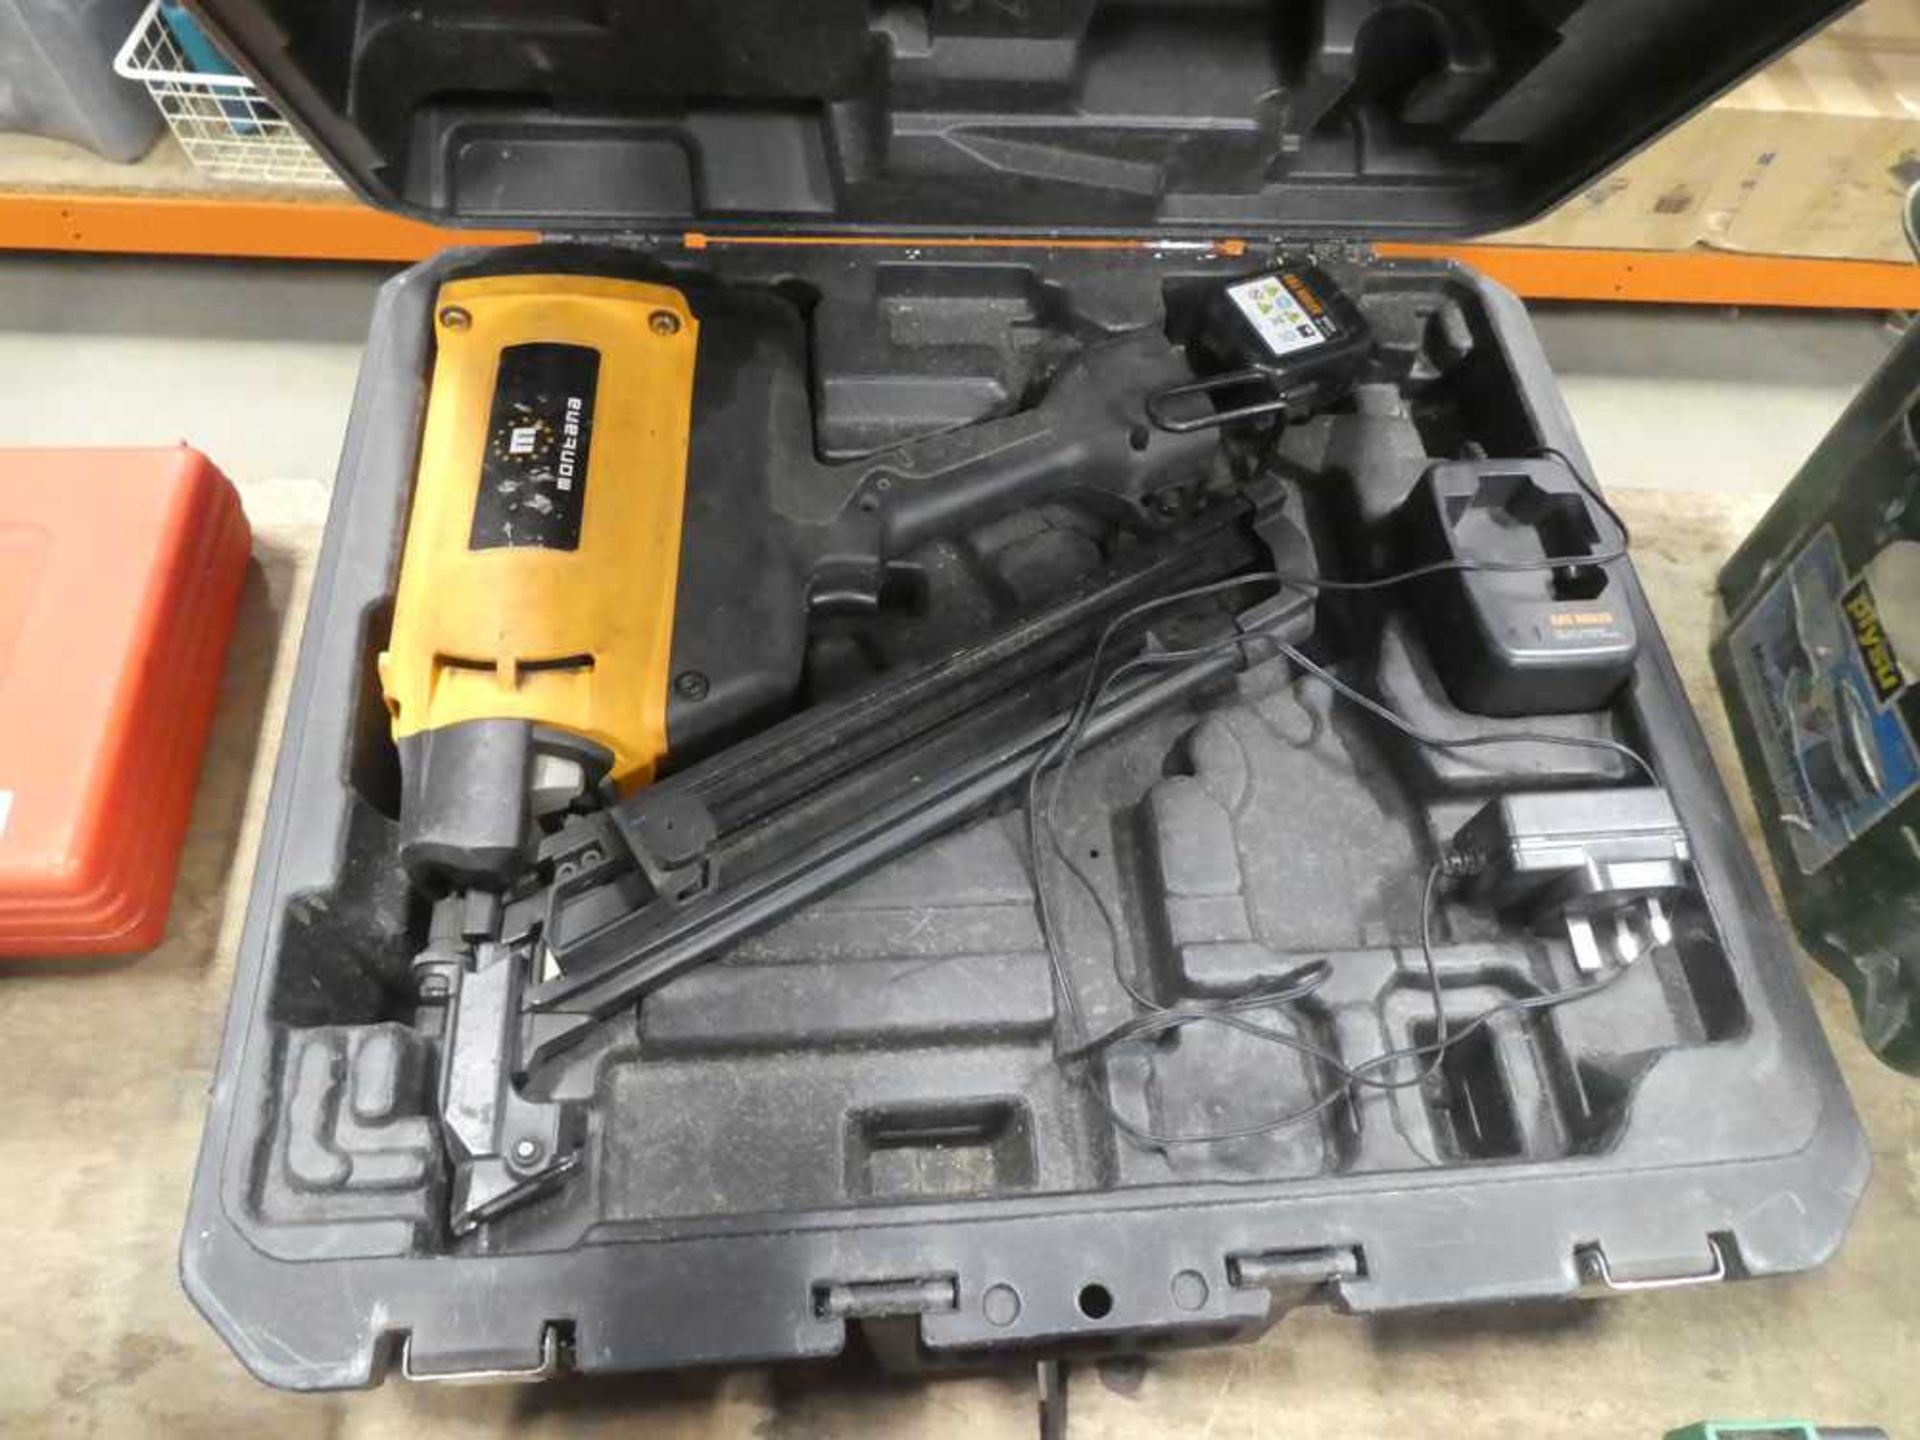 Cased Montana cordless nail gun with a battery and charger